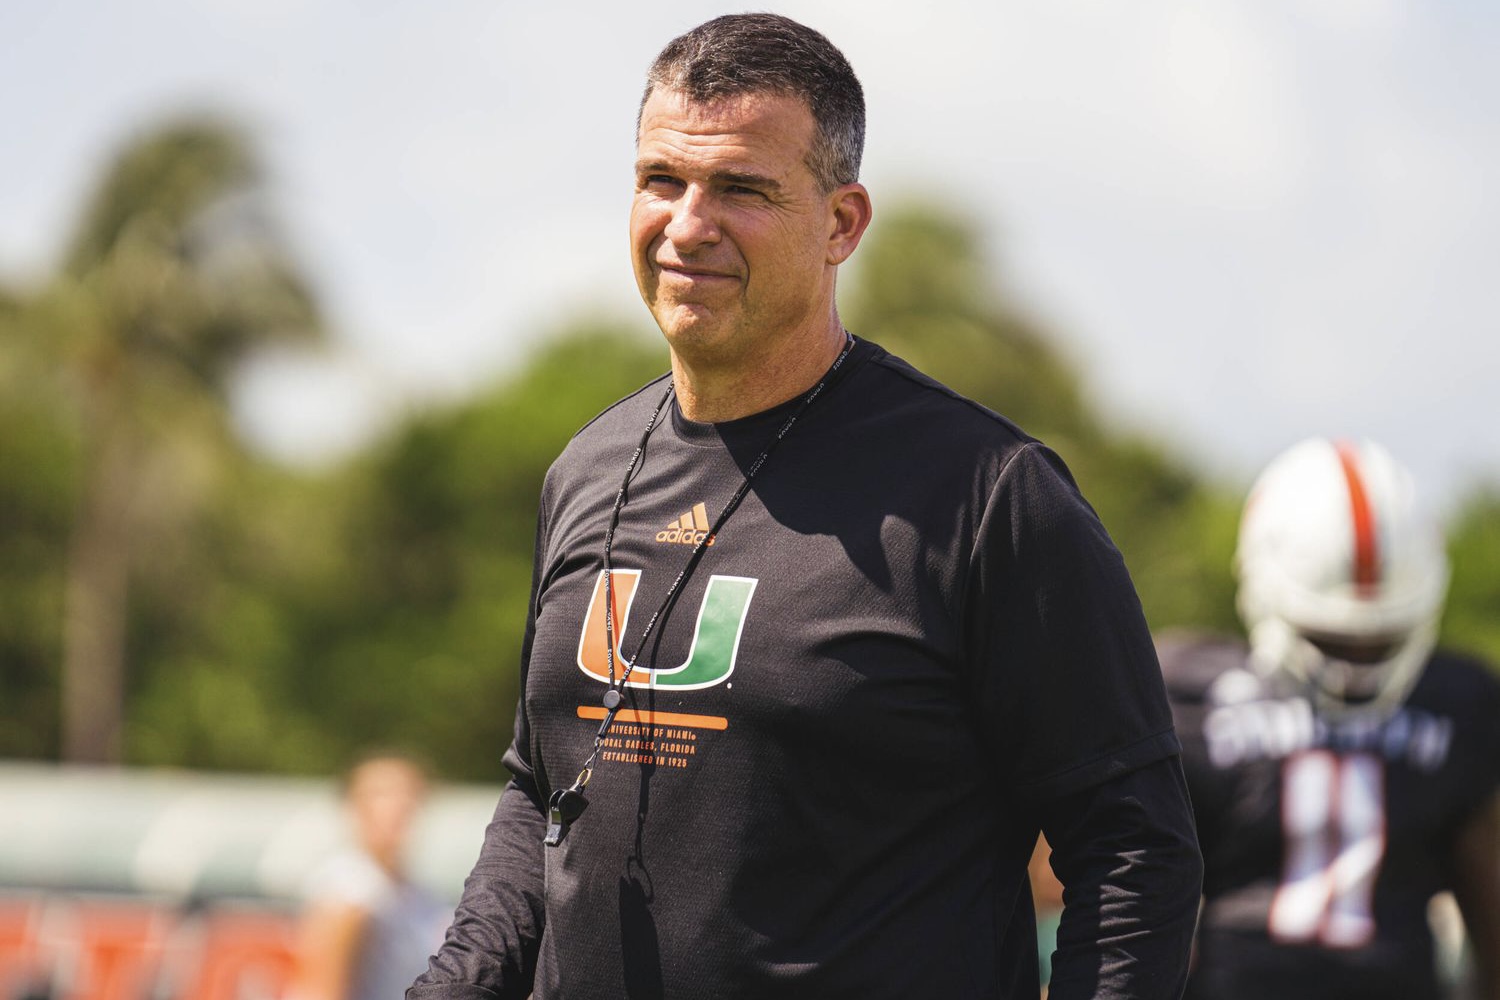 Virginia has a chance to build momentum with shaky Miami coming to town